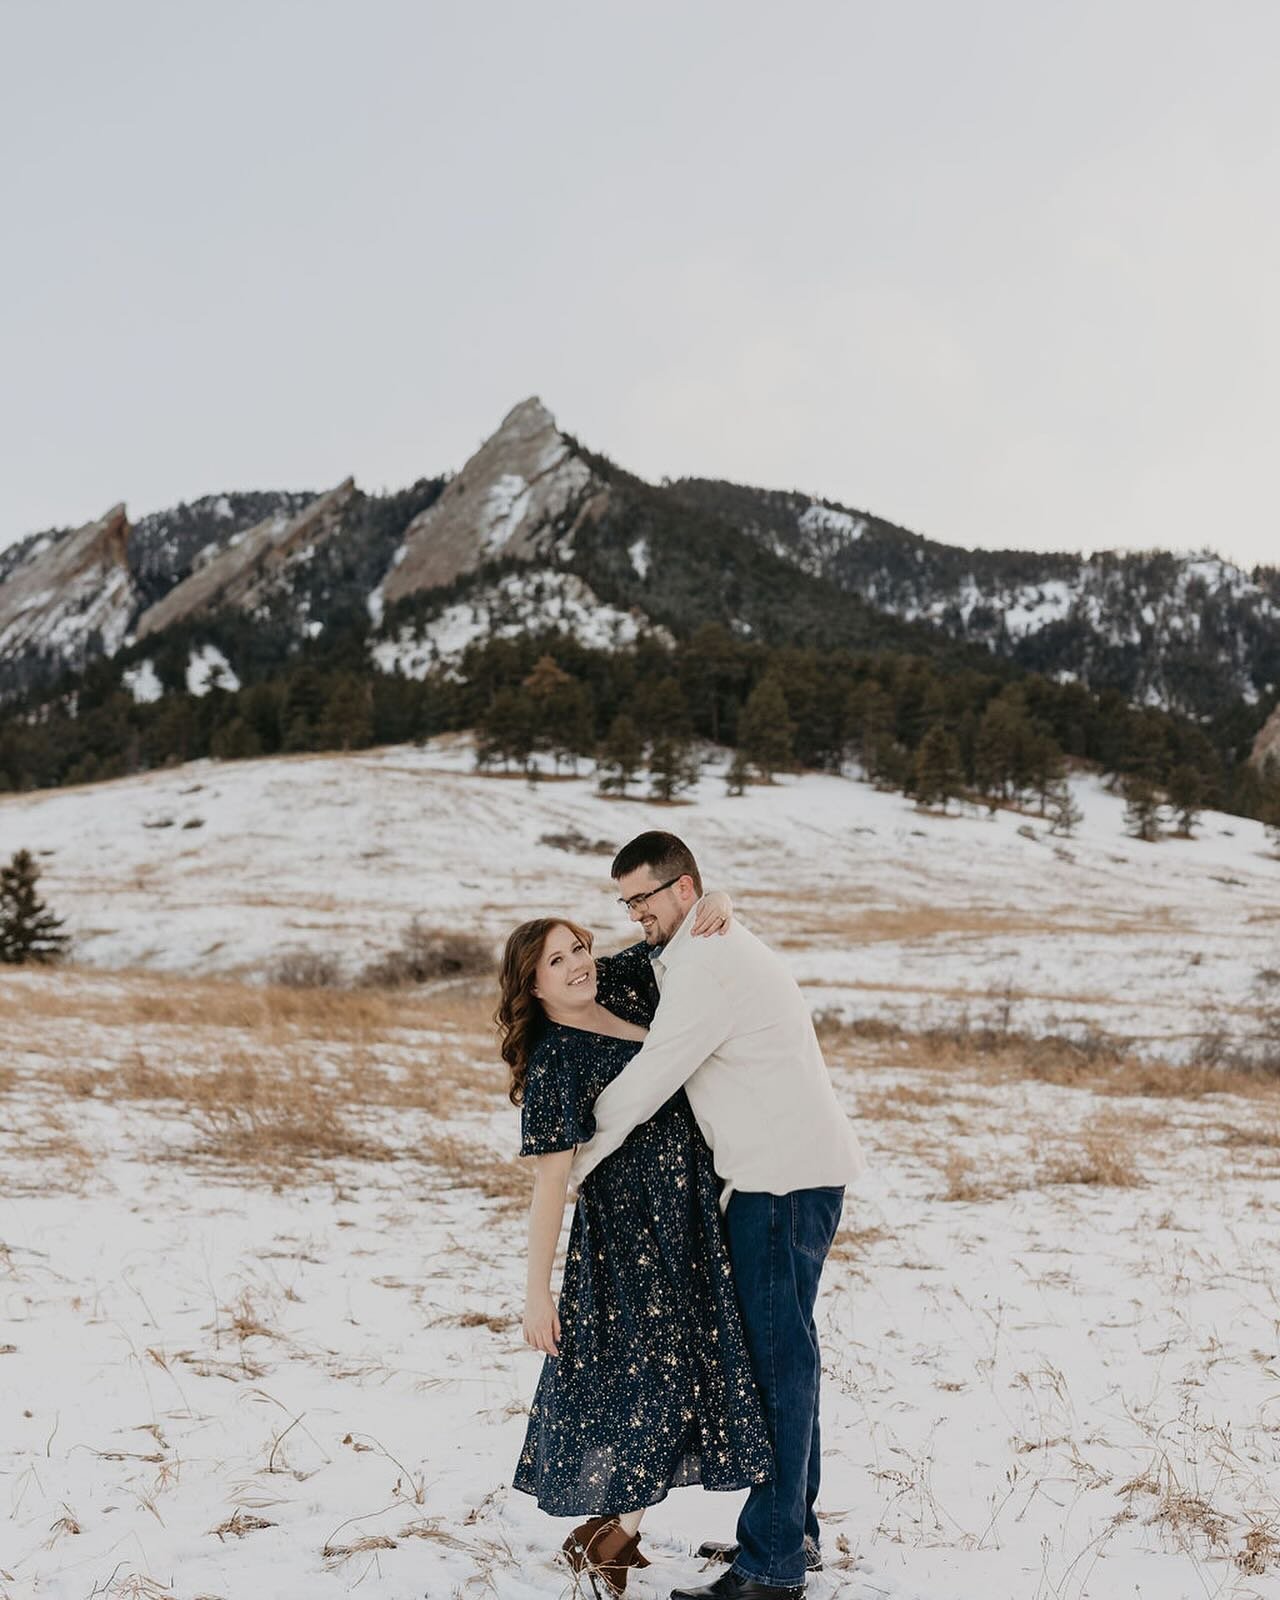 Excited to share my newest couple! Ricci and Justin will  travel from snowy Colorado to sunny Arizona to tie the knot this fall! ✨
.
Photo: @jessica__cooke 
.
#brideandgroom #engagementphotos #shesaidyes #coloradocouple #azwedding #fallwedding #futur